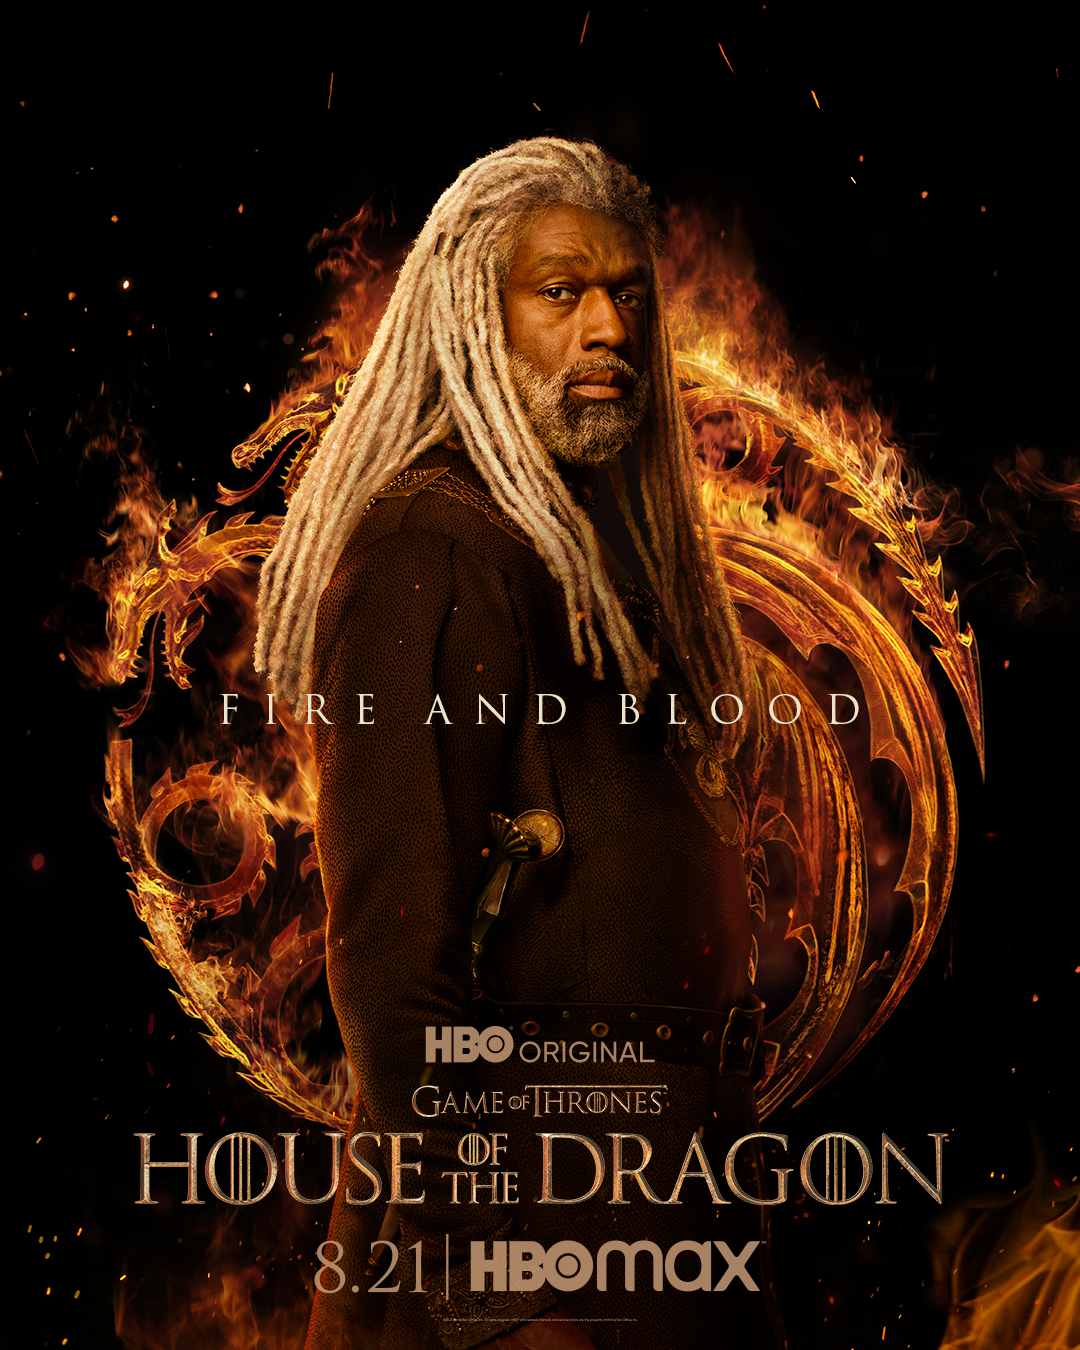 Game of Thrones - House of the Dragon [HBO - 2022] FR8dSfQX0AADG_g?format=jpg&name=large